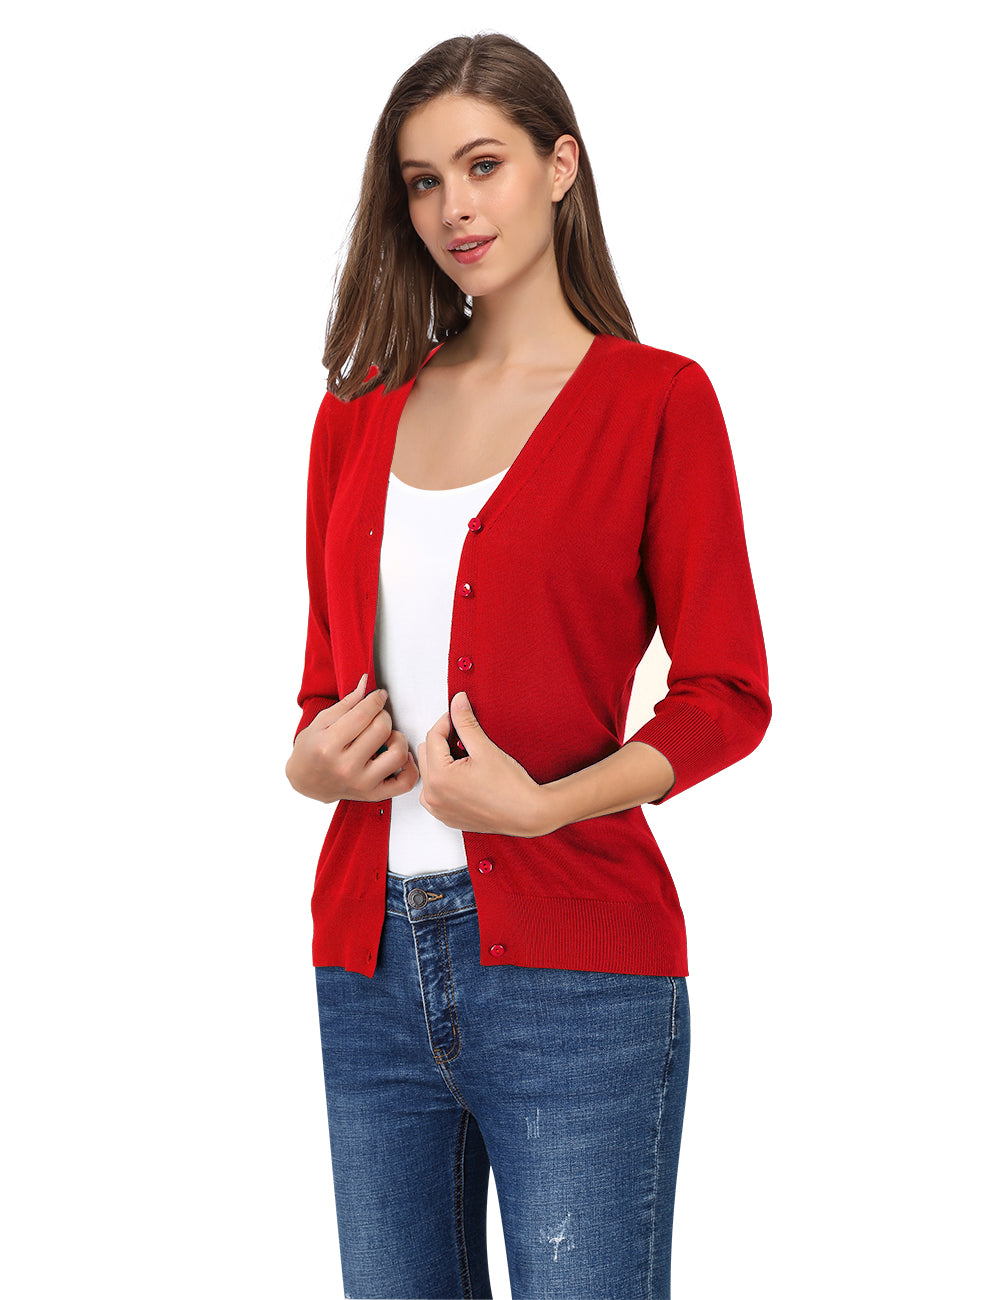 YESFASHION Women's Cardigan Tops Wear Alone or Match With Dress